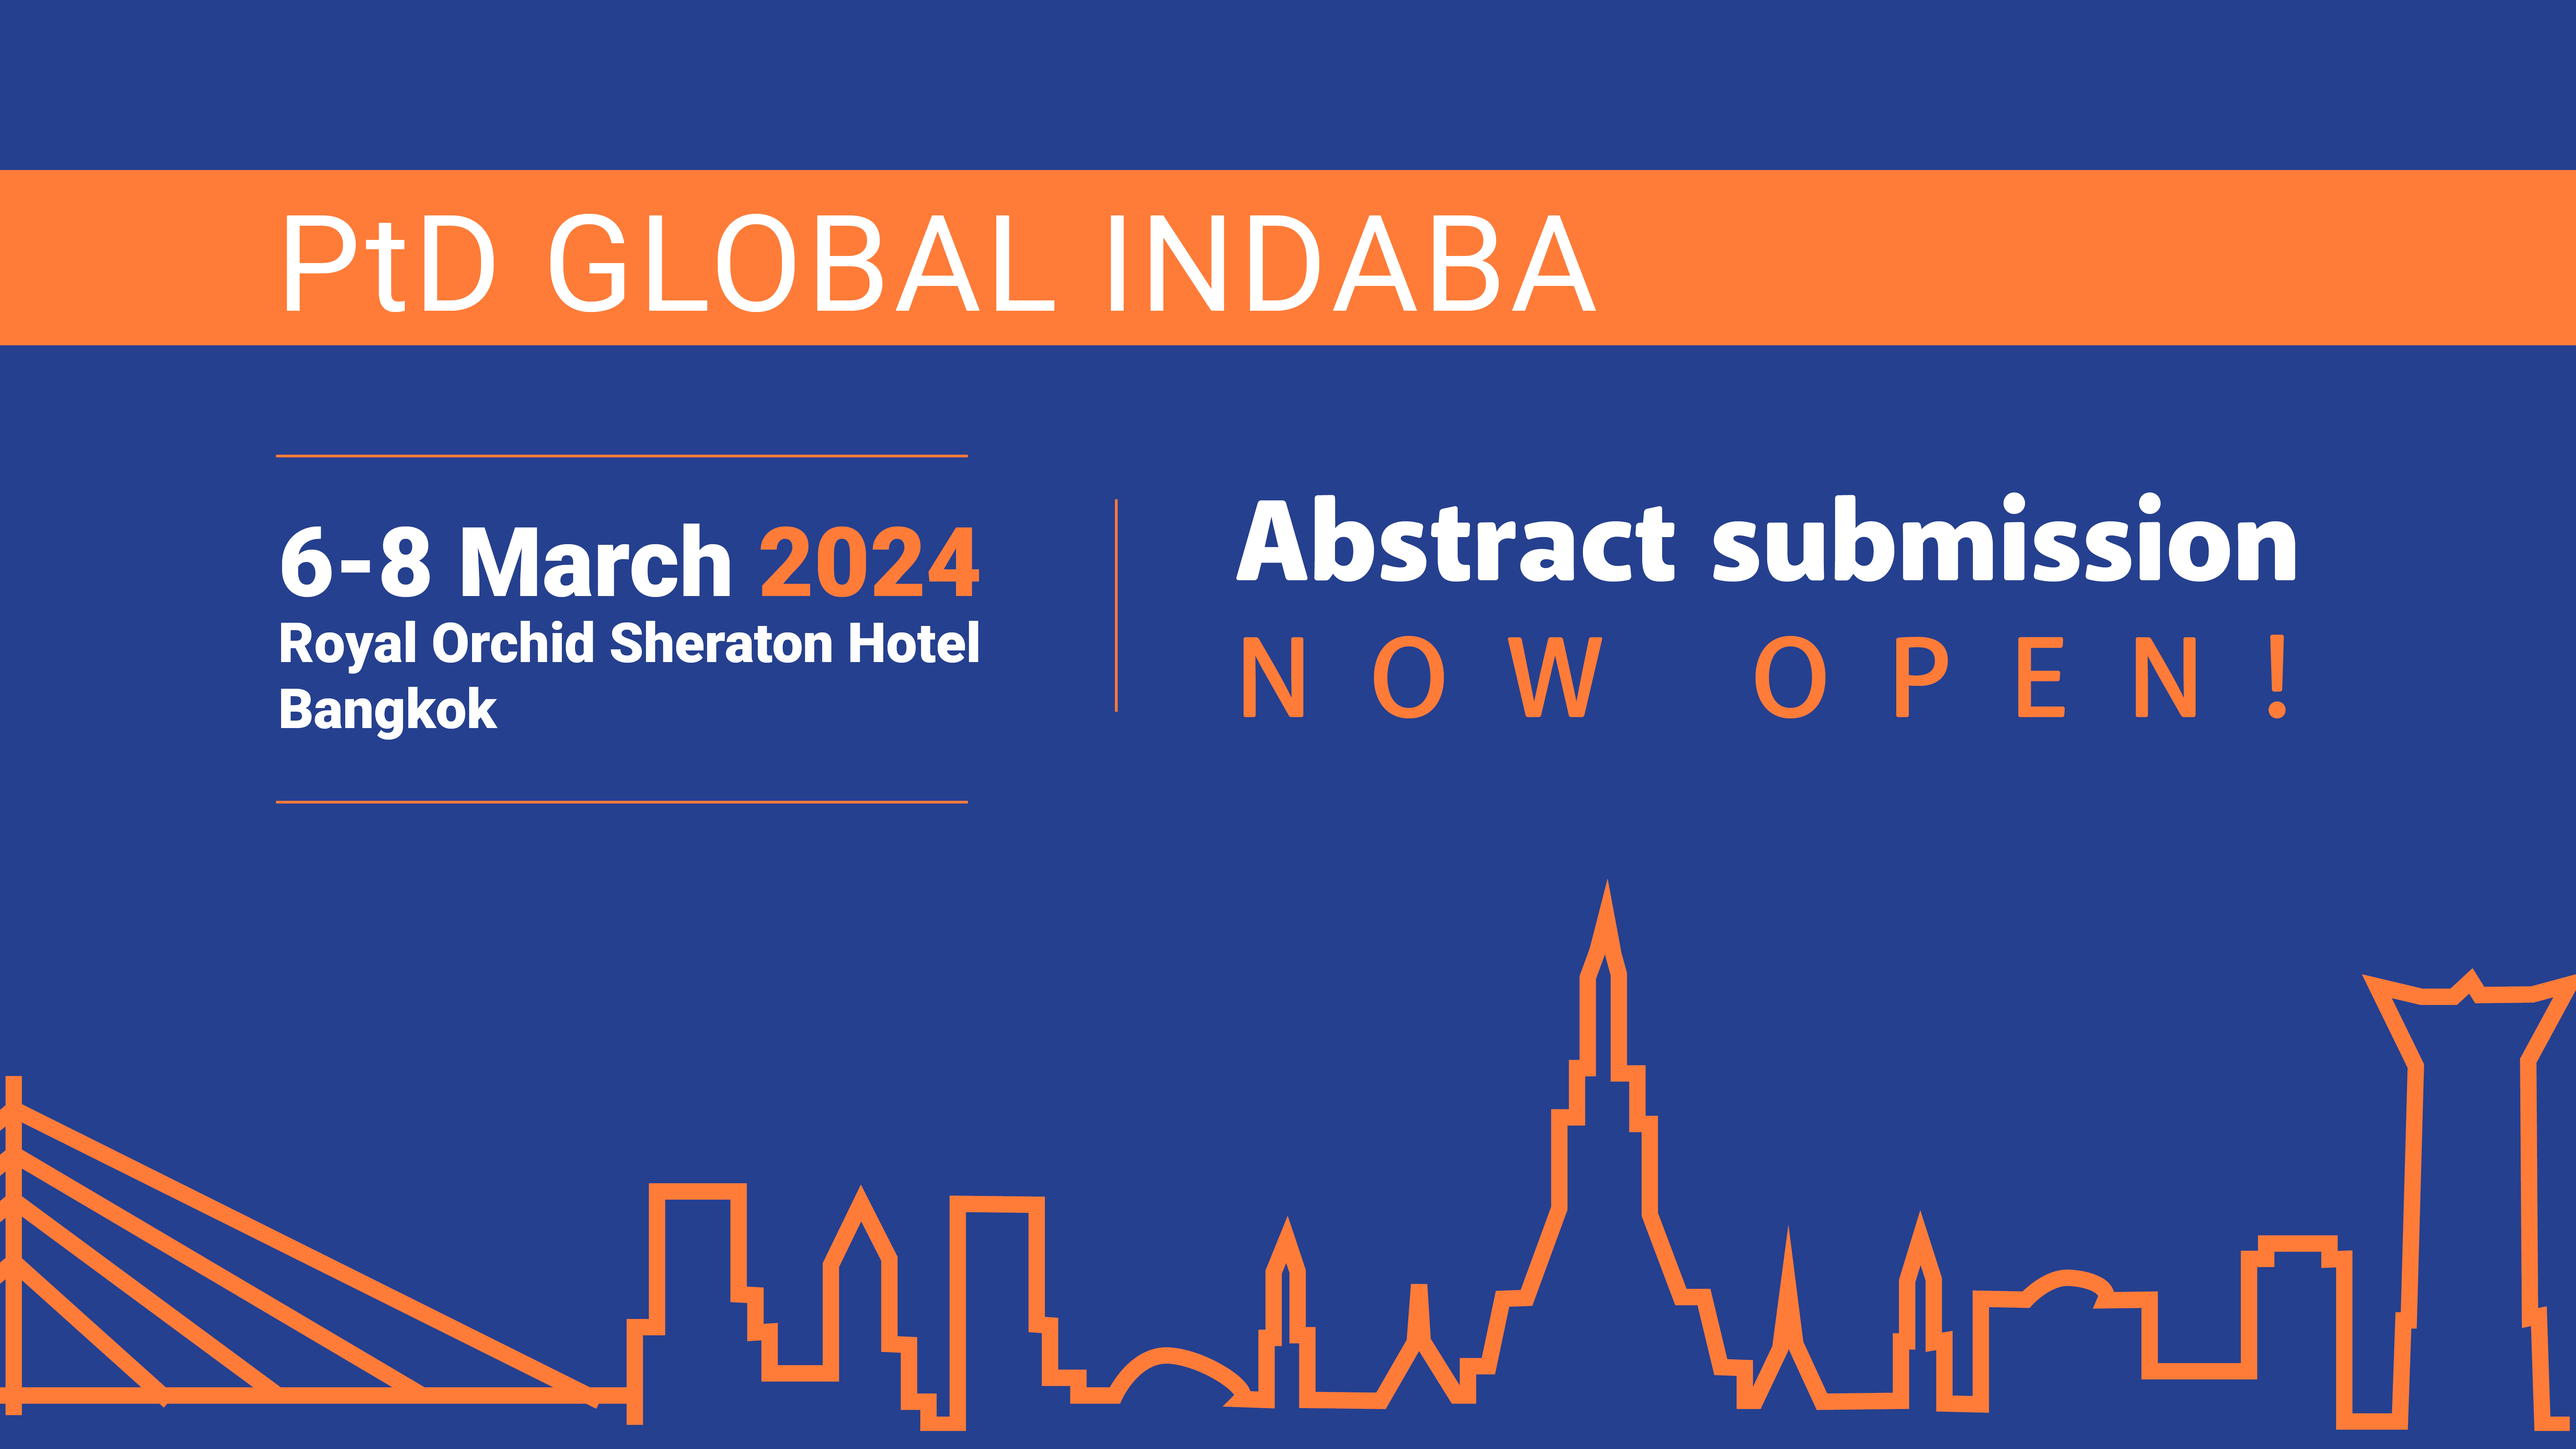 PtD Global Indaba abstcact submission now open!